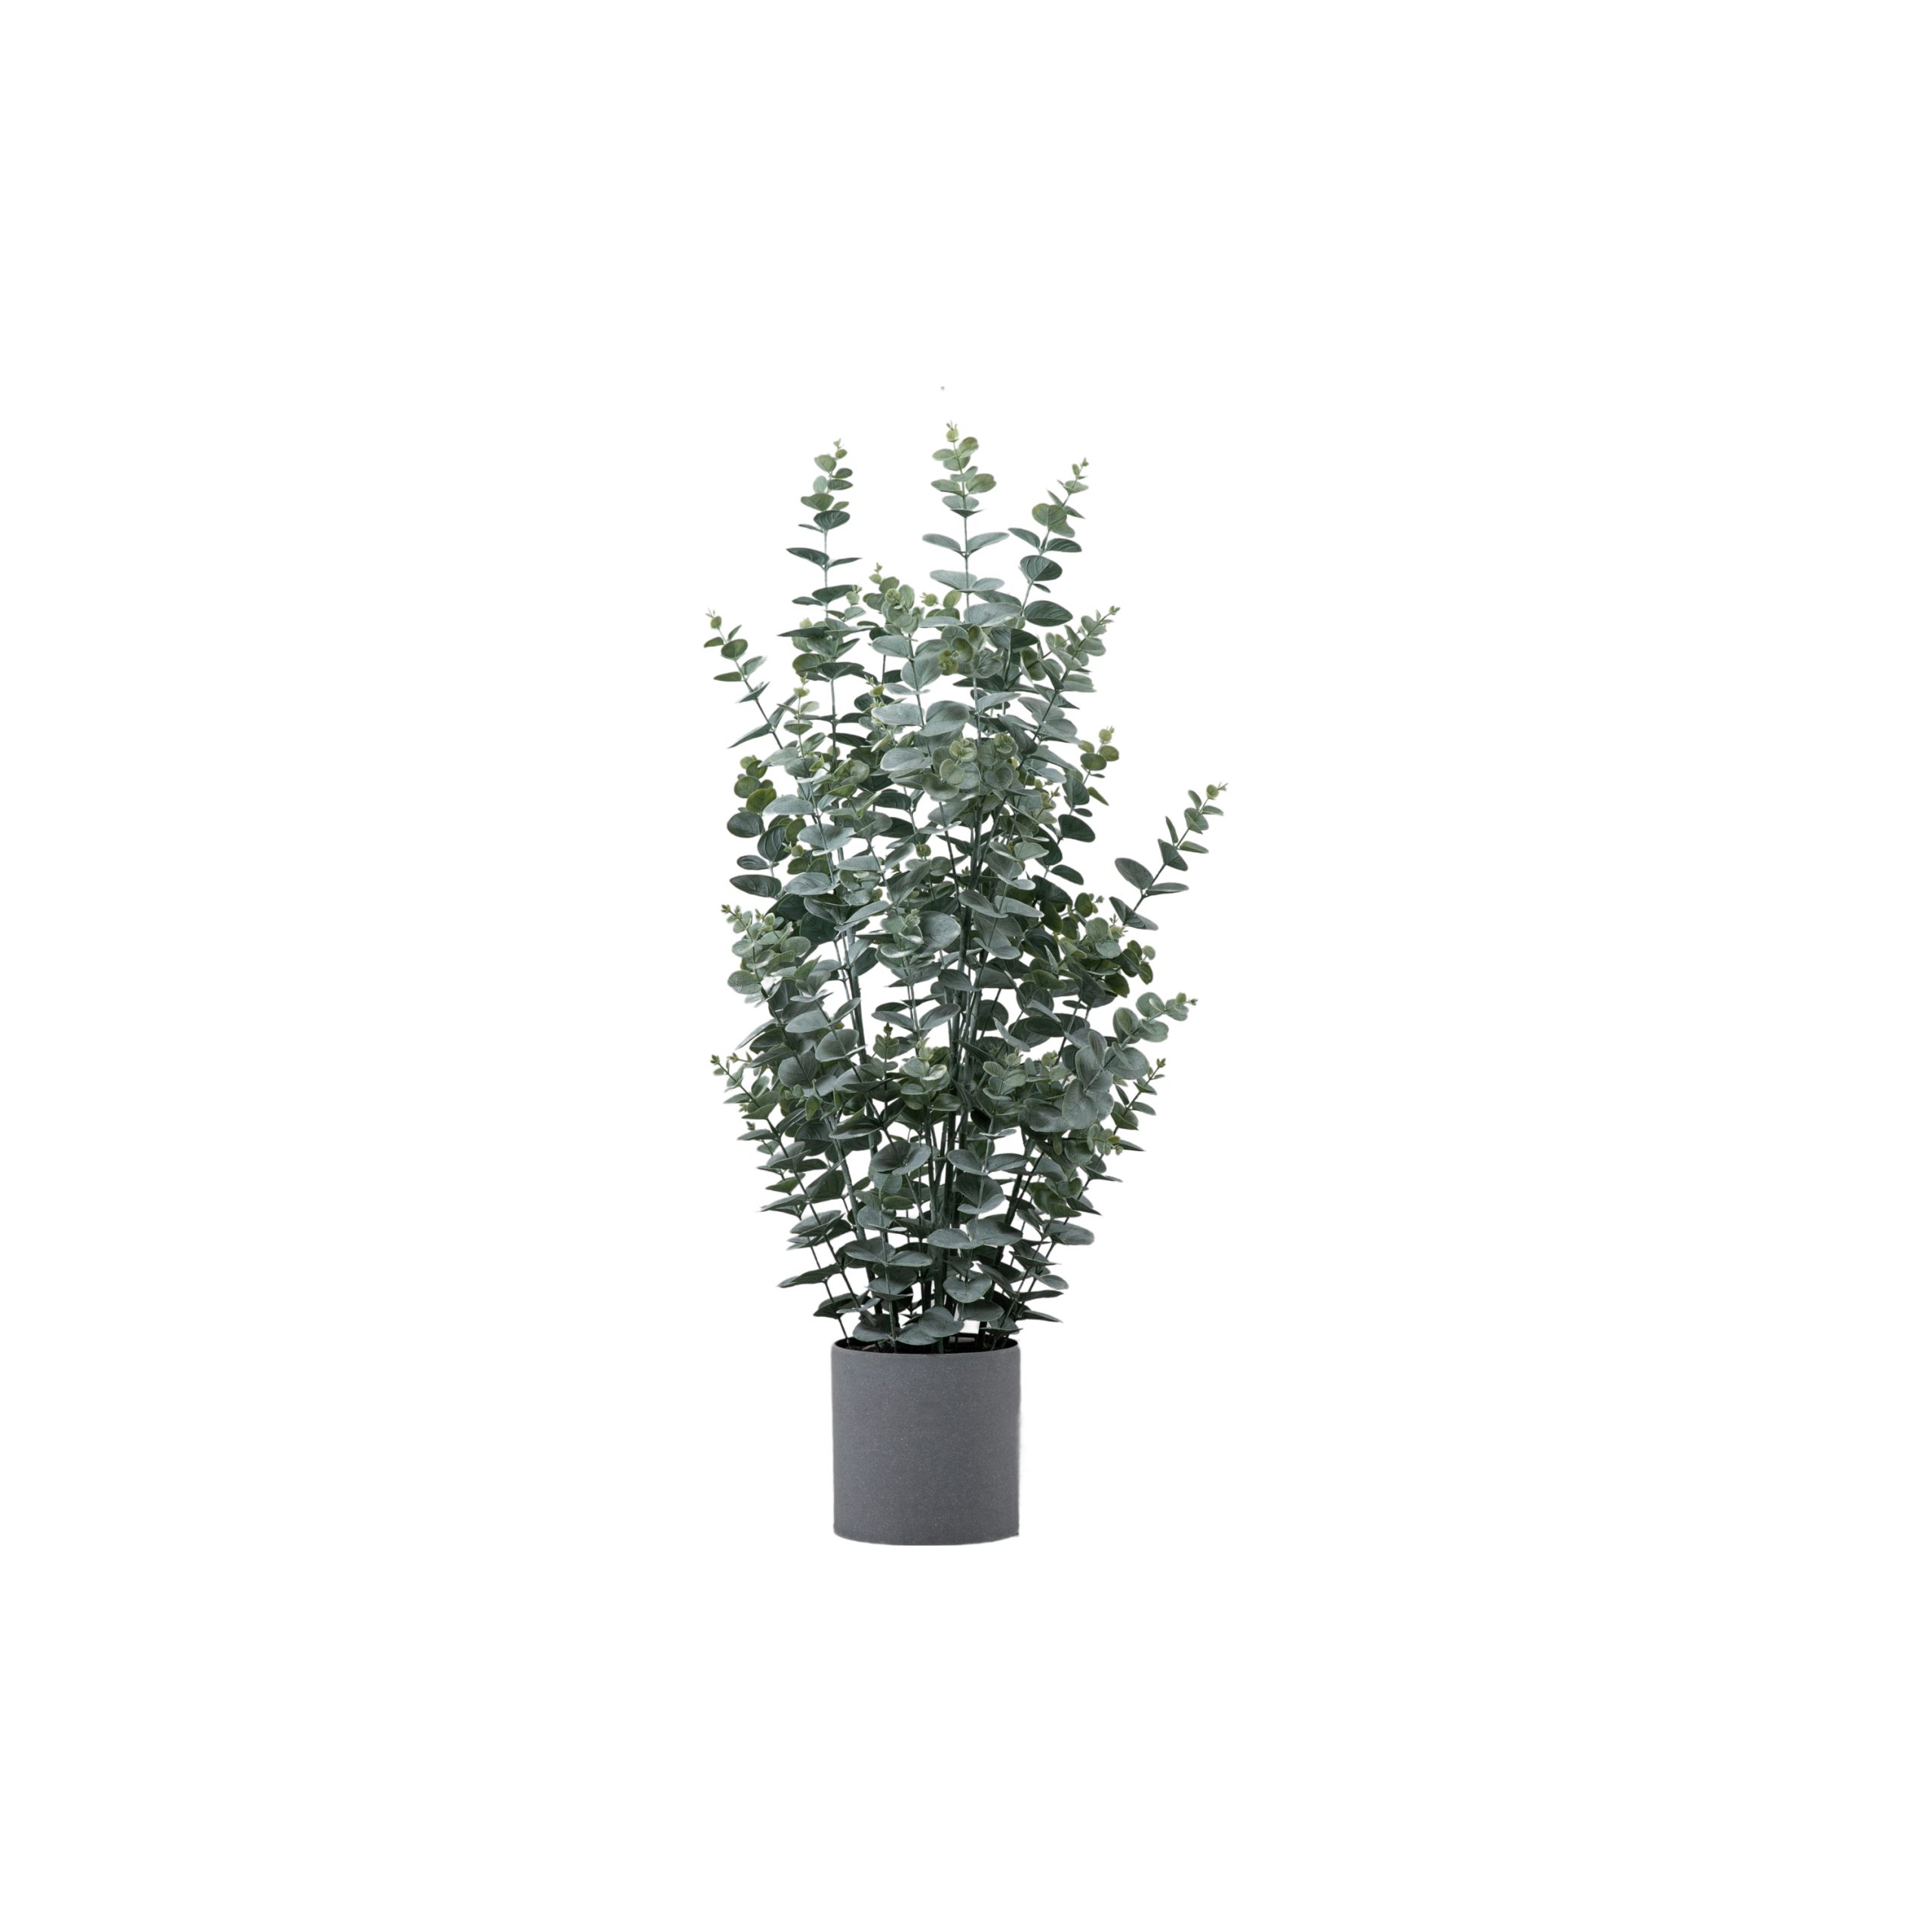 Gallery Direct Potted Eucalyptus Bush Green